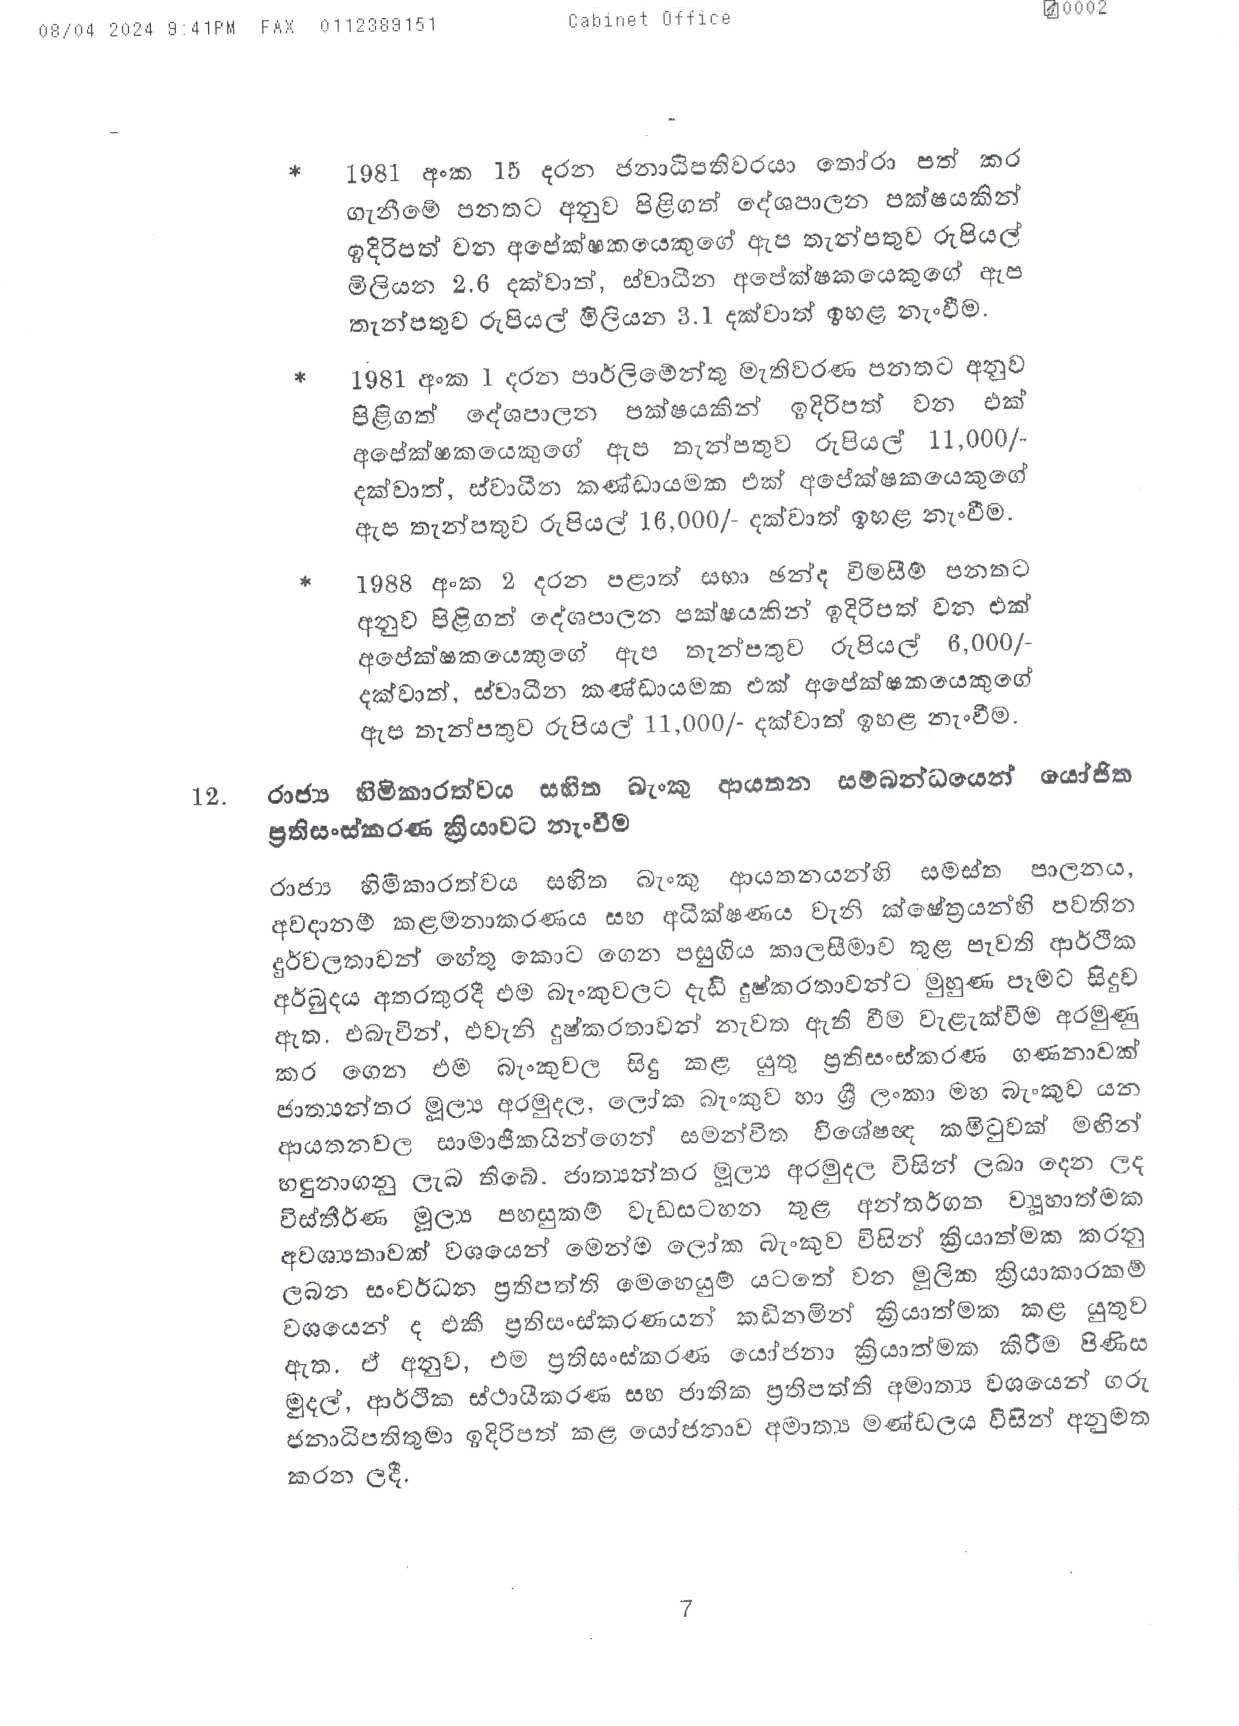 Cabinet Decision on 08.04.2024 page 007